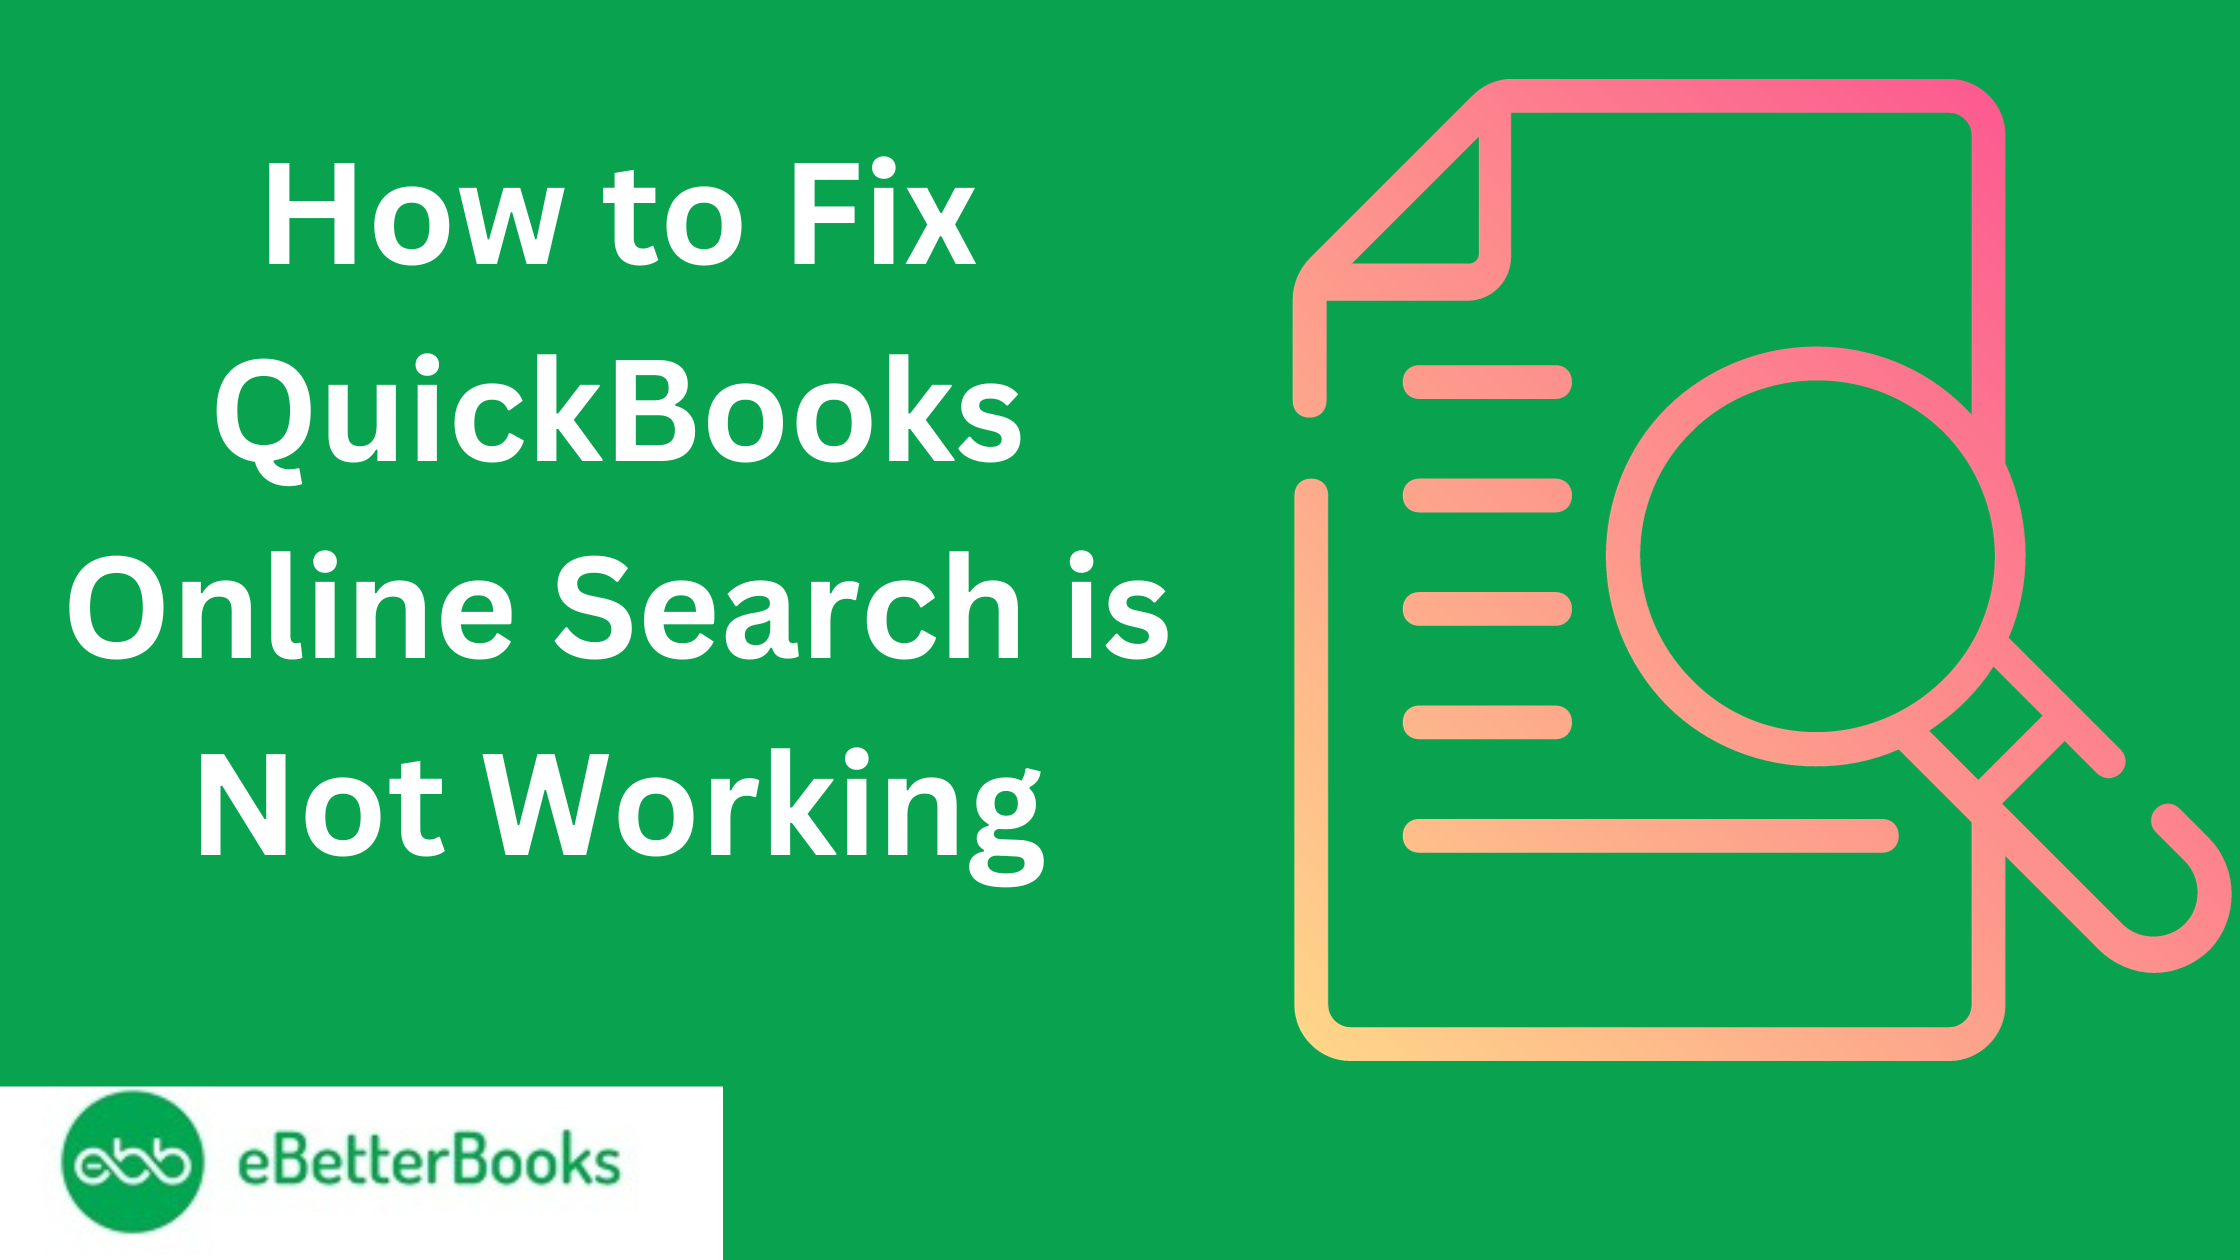 QuickBooks Online Search is Not Working